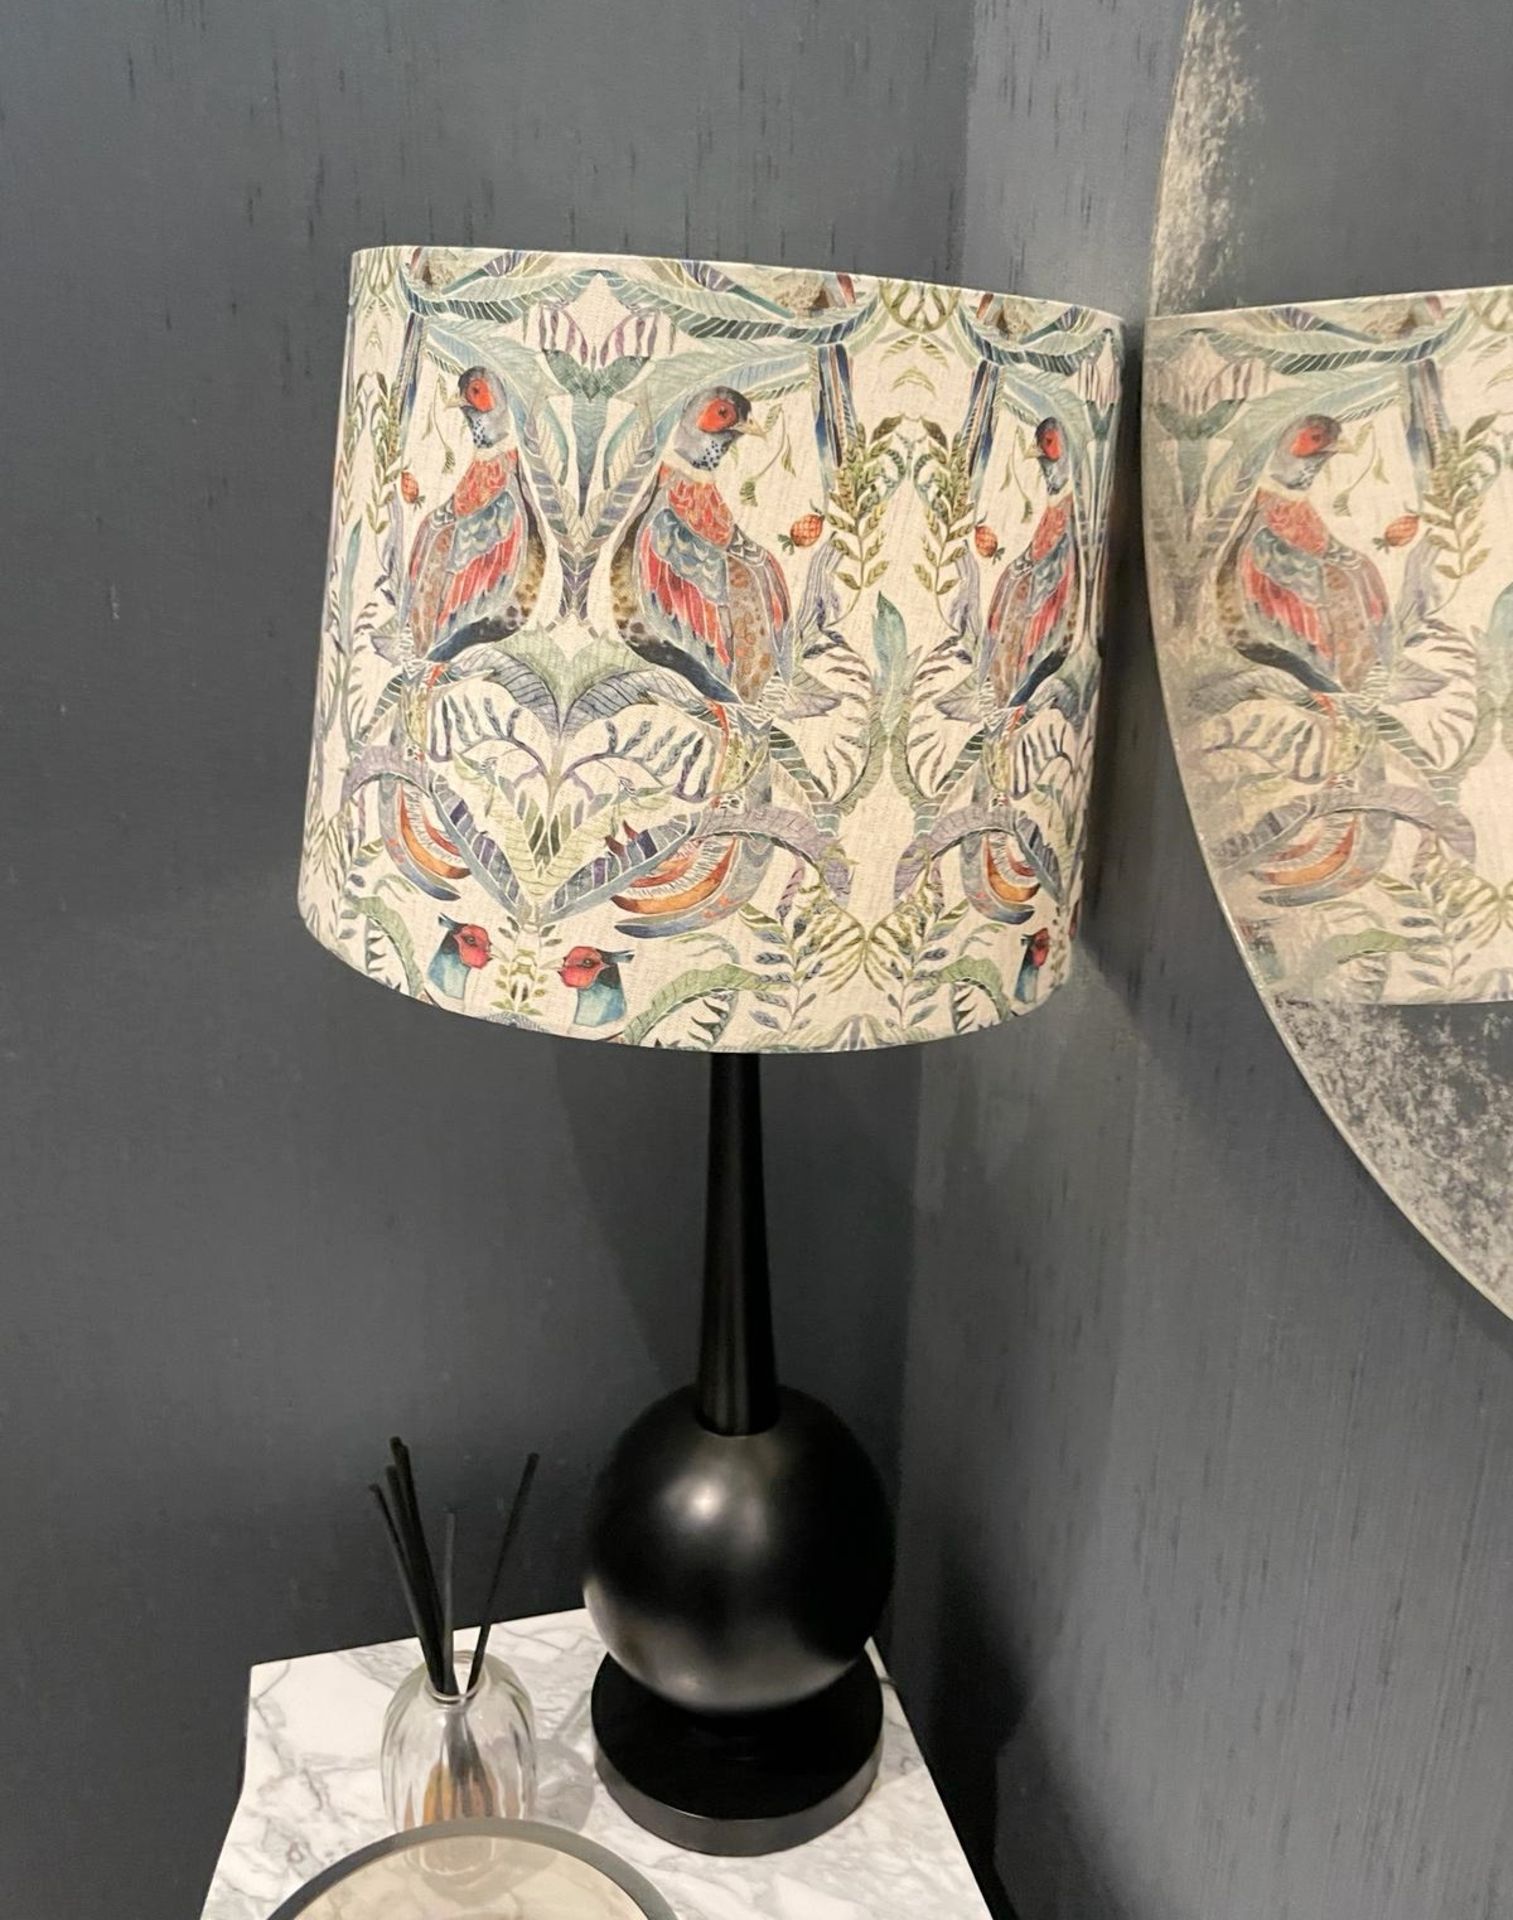 1 x Sleek Designer Table Lamp With Large Decorated Shade, 85cm Tall - CL894 - NO VAT ON THE HAMMER - Image 2 of 7